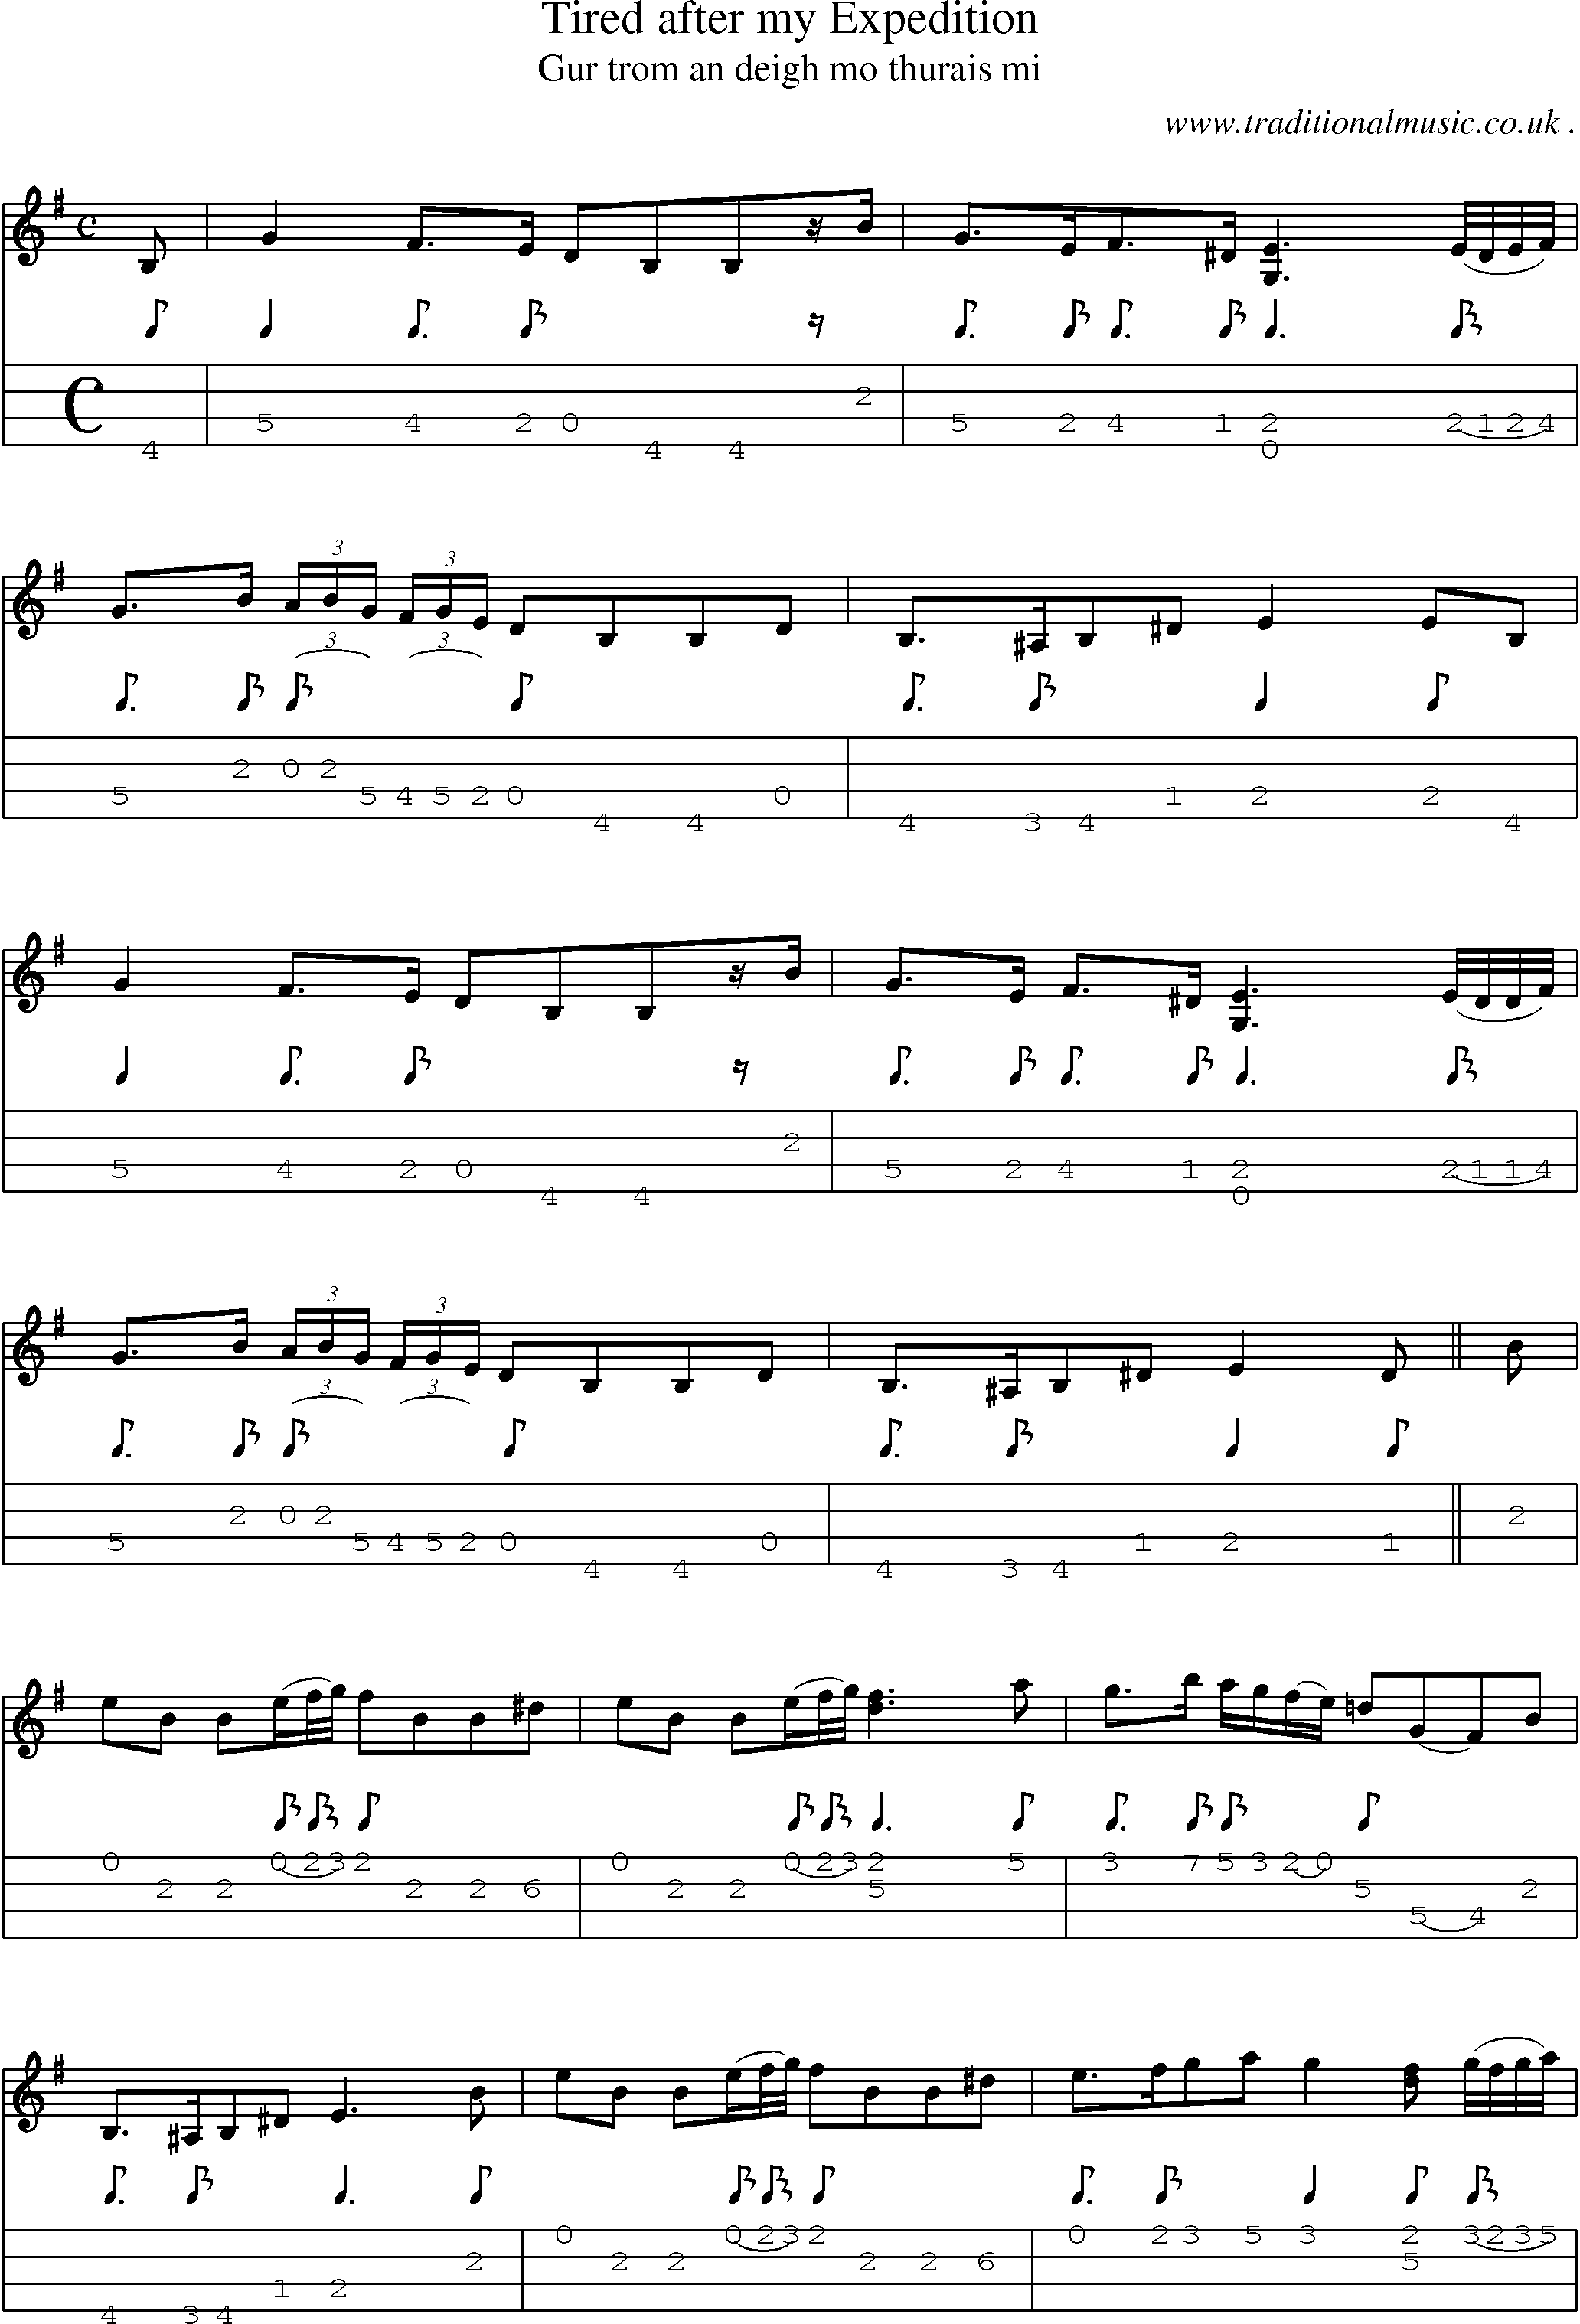 Sheet-music  score, Chords and Mandolin Tabs for Tired After My Expedition